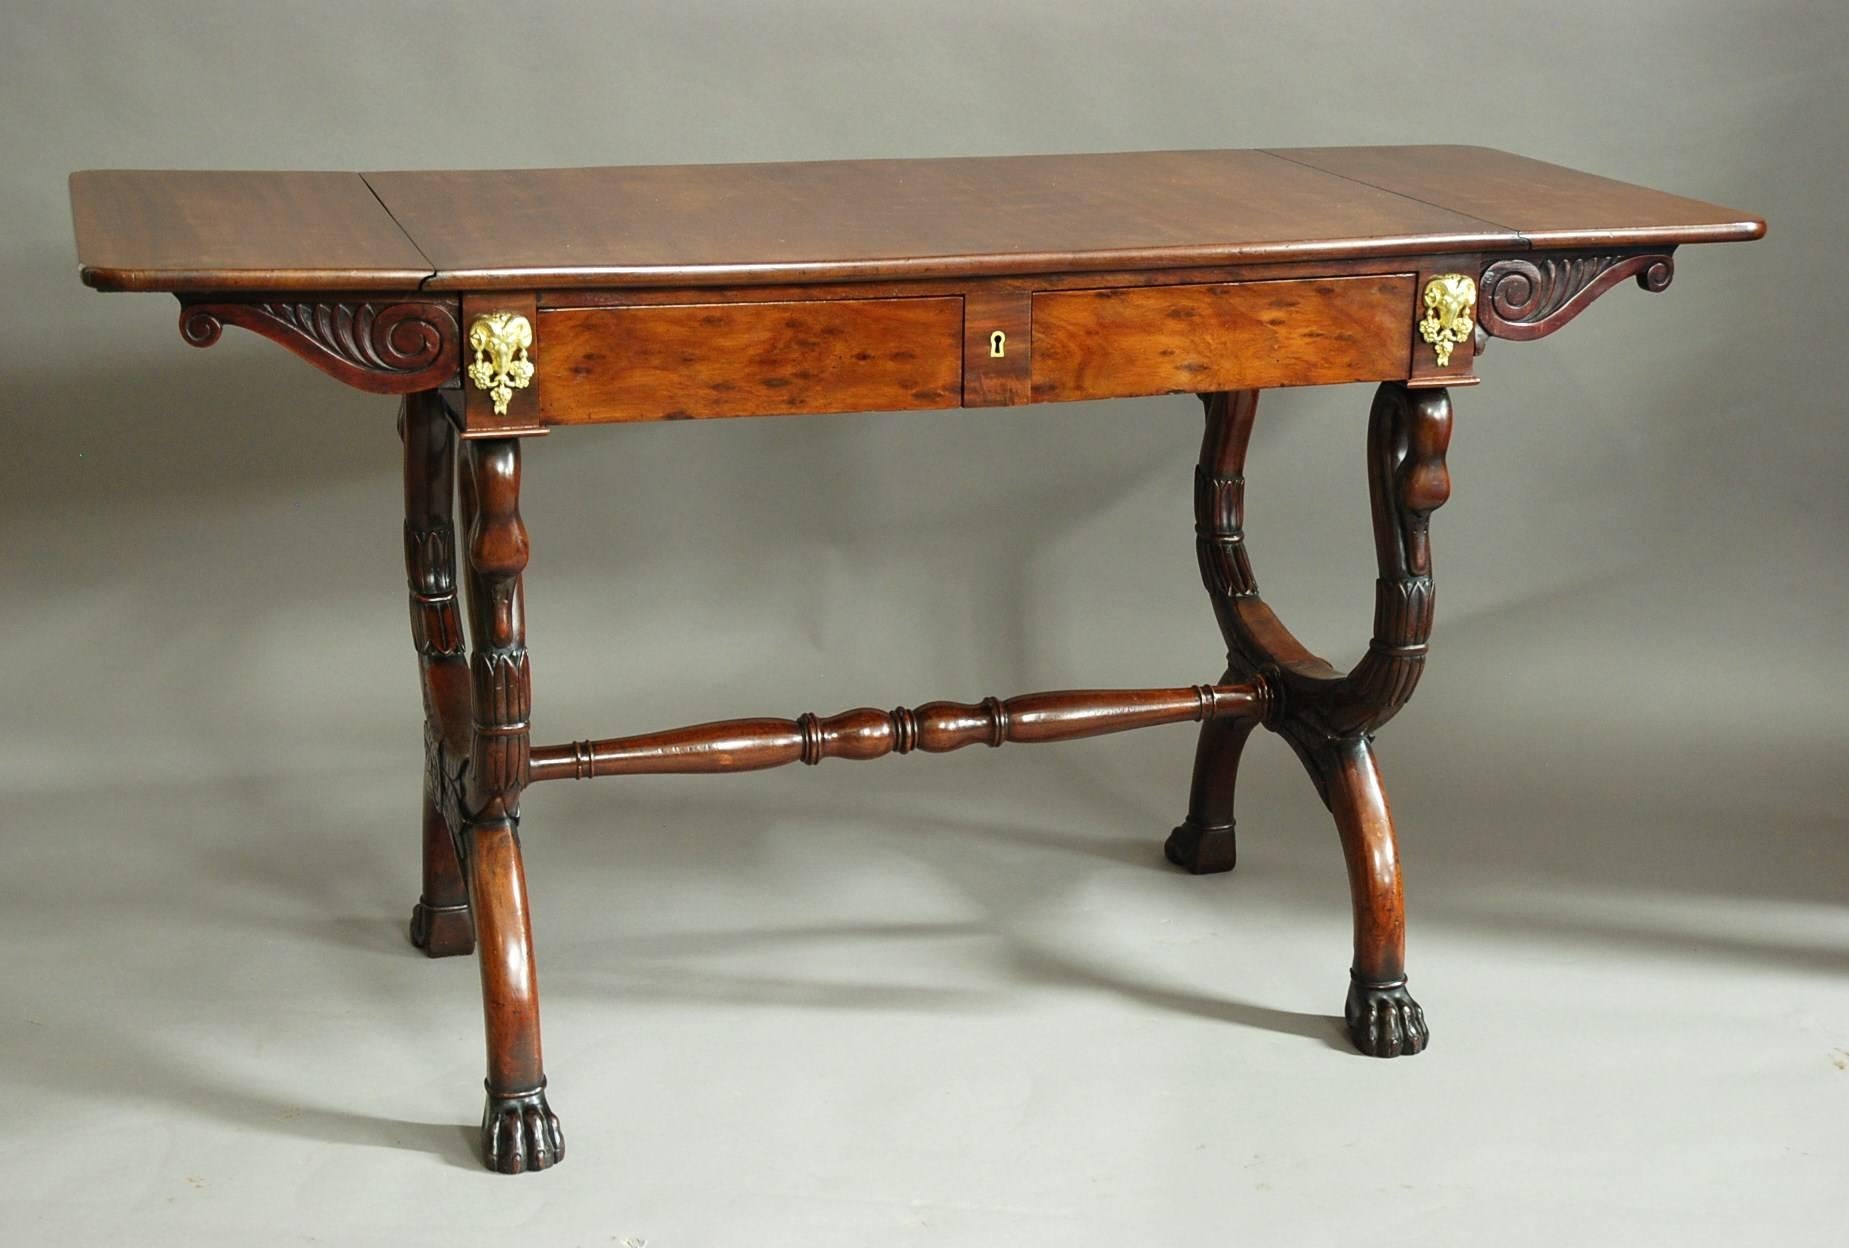 An early 19th century French Empire mahogany sofa table of superb patina (colour) and quality, attributed to Jean-Joseph Chapuis (1765-1864).

This table consists of a solid mahogany top with drop leaves at each end with carved scrolled